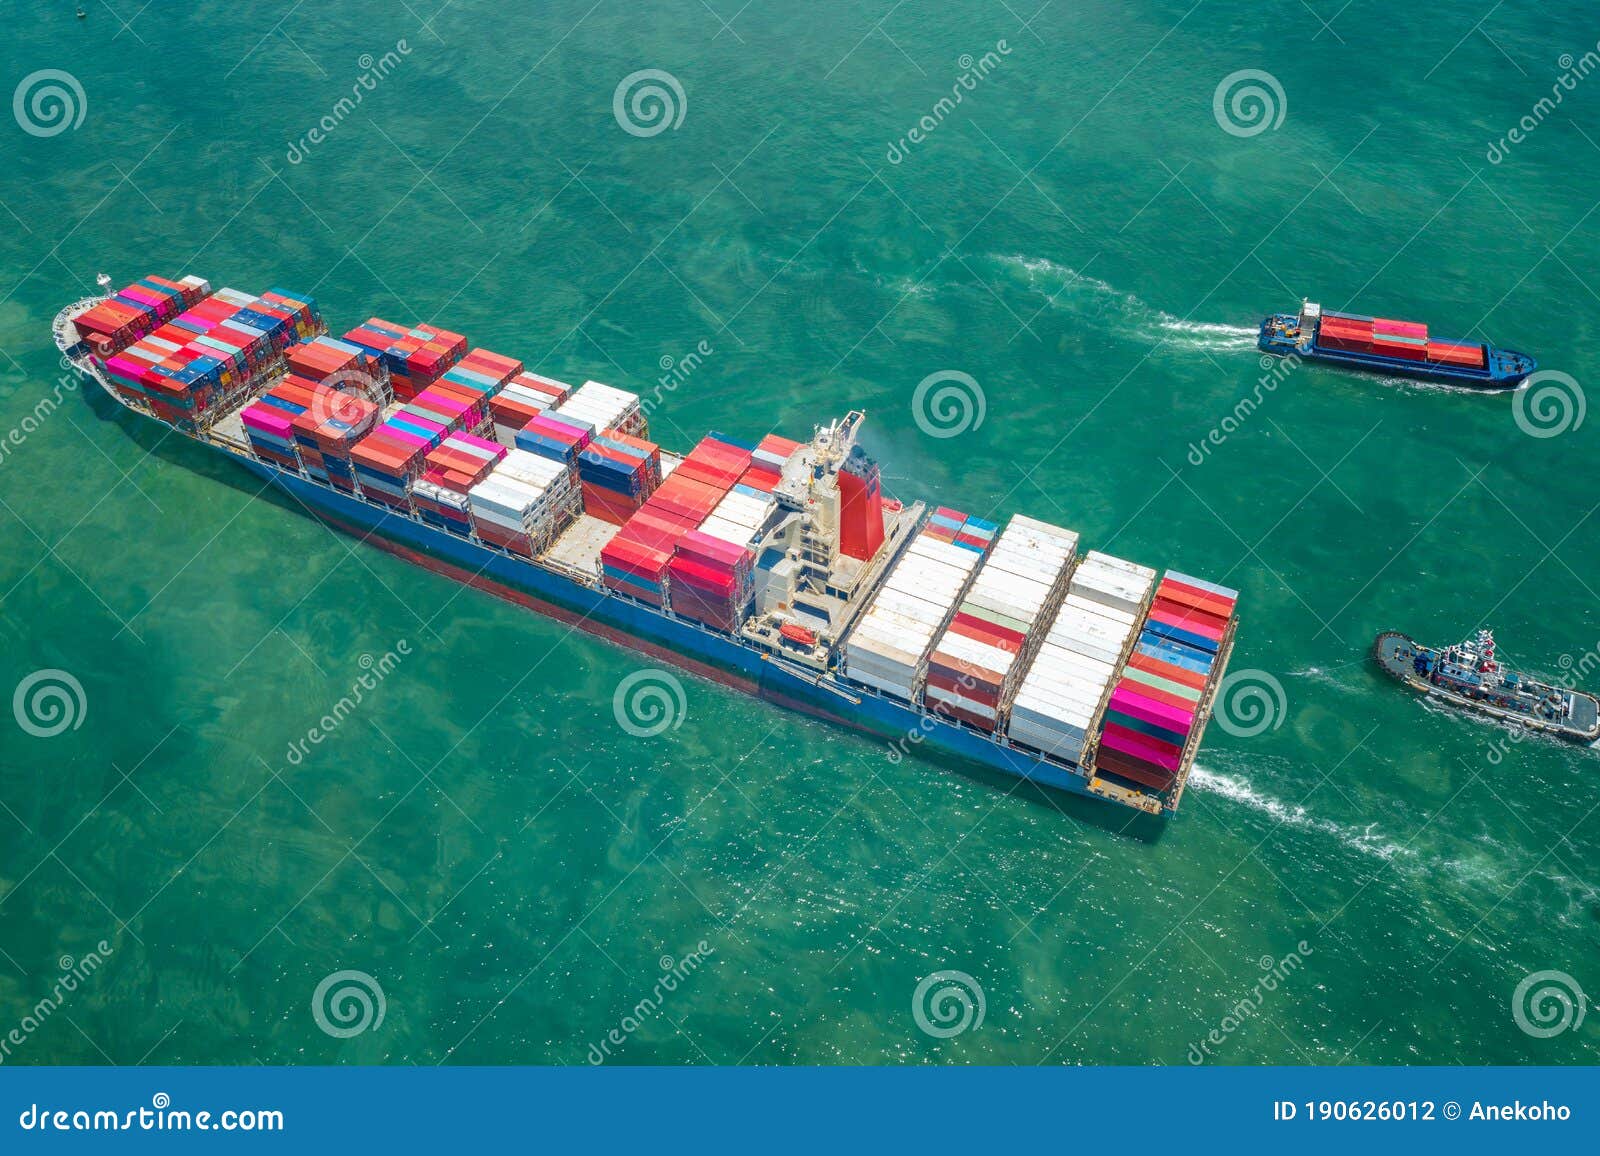 topview of vessel transportation and container boat